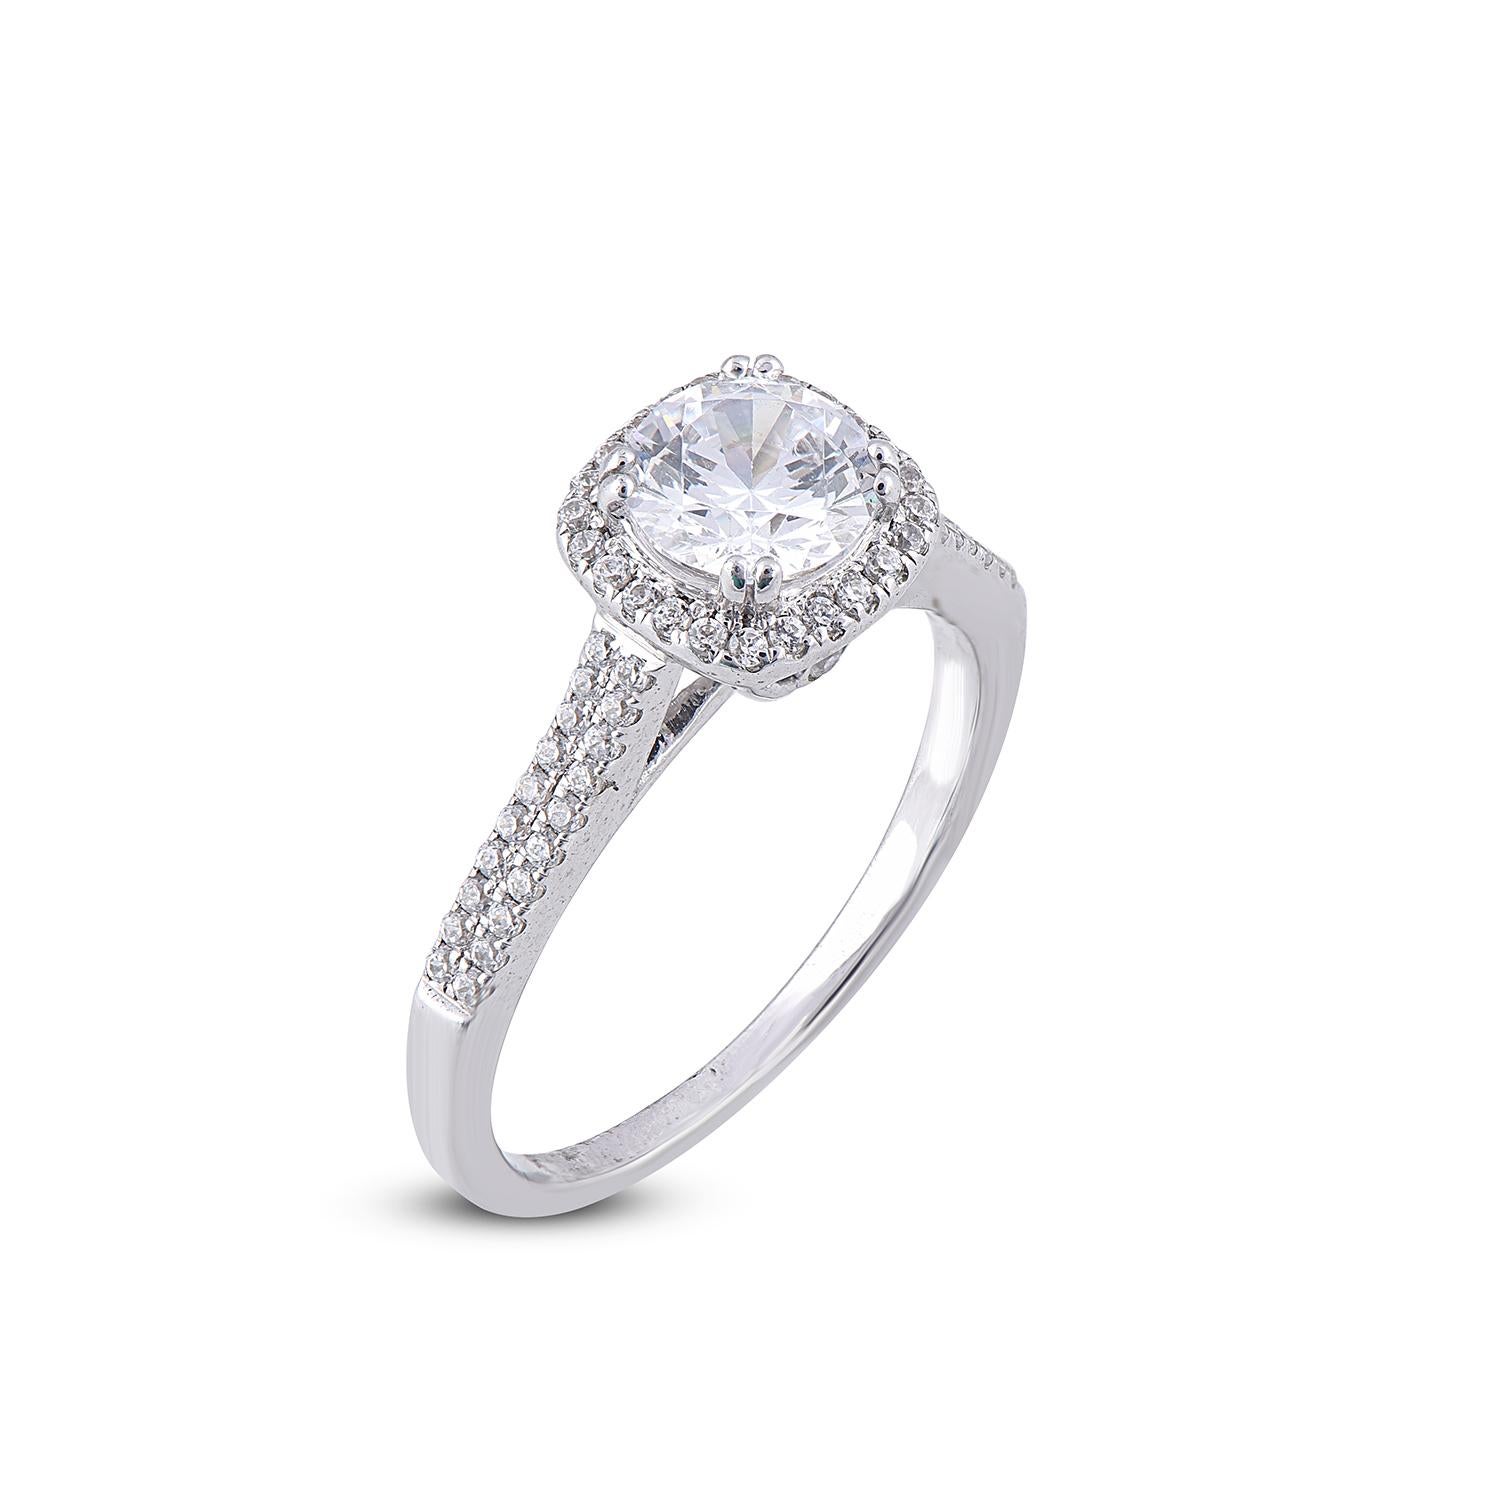 Stunning and classic, this diamond ring is beautifully crafted in 18 Karat white gold. The cushion shape engagement ring feature 1.00 ct centre stone and 0.35 ct diamond on frame and shank lined with rows of sparkling 66 round white diamonds in